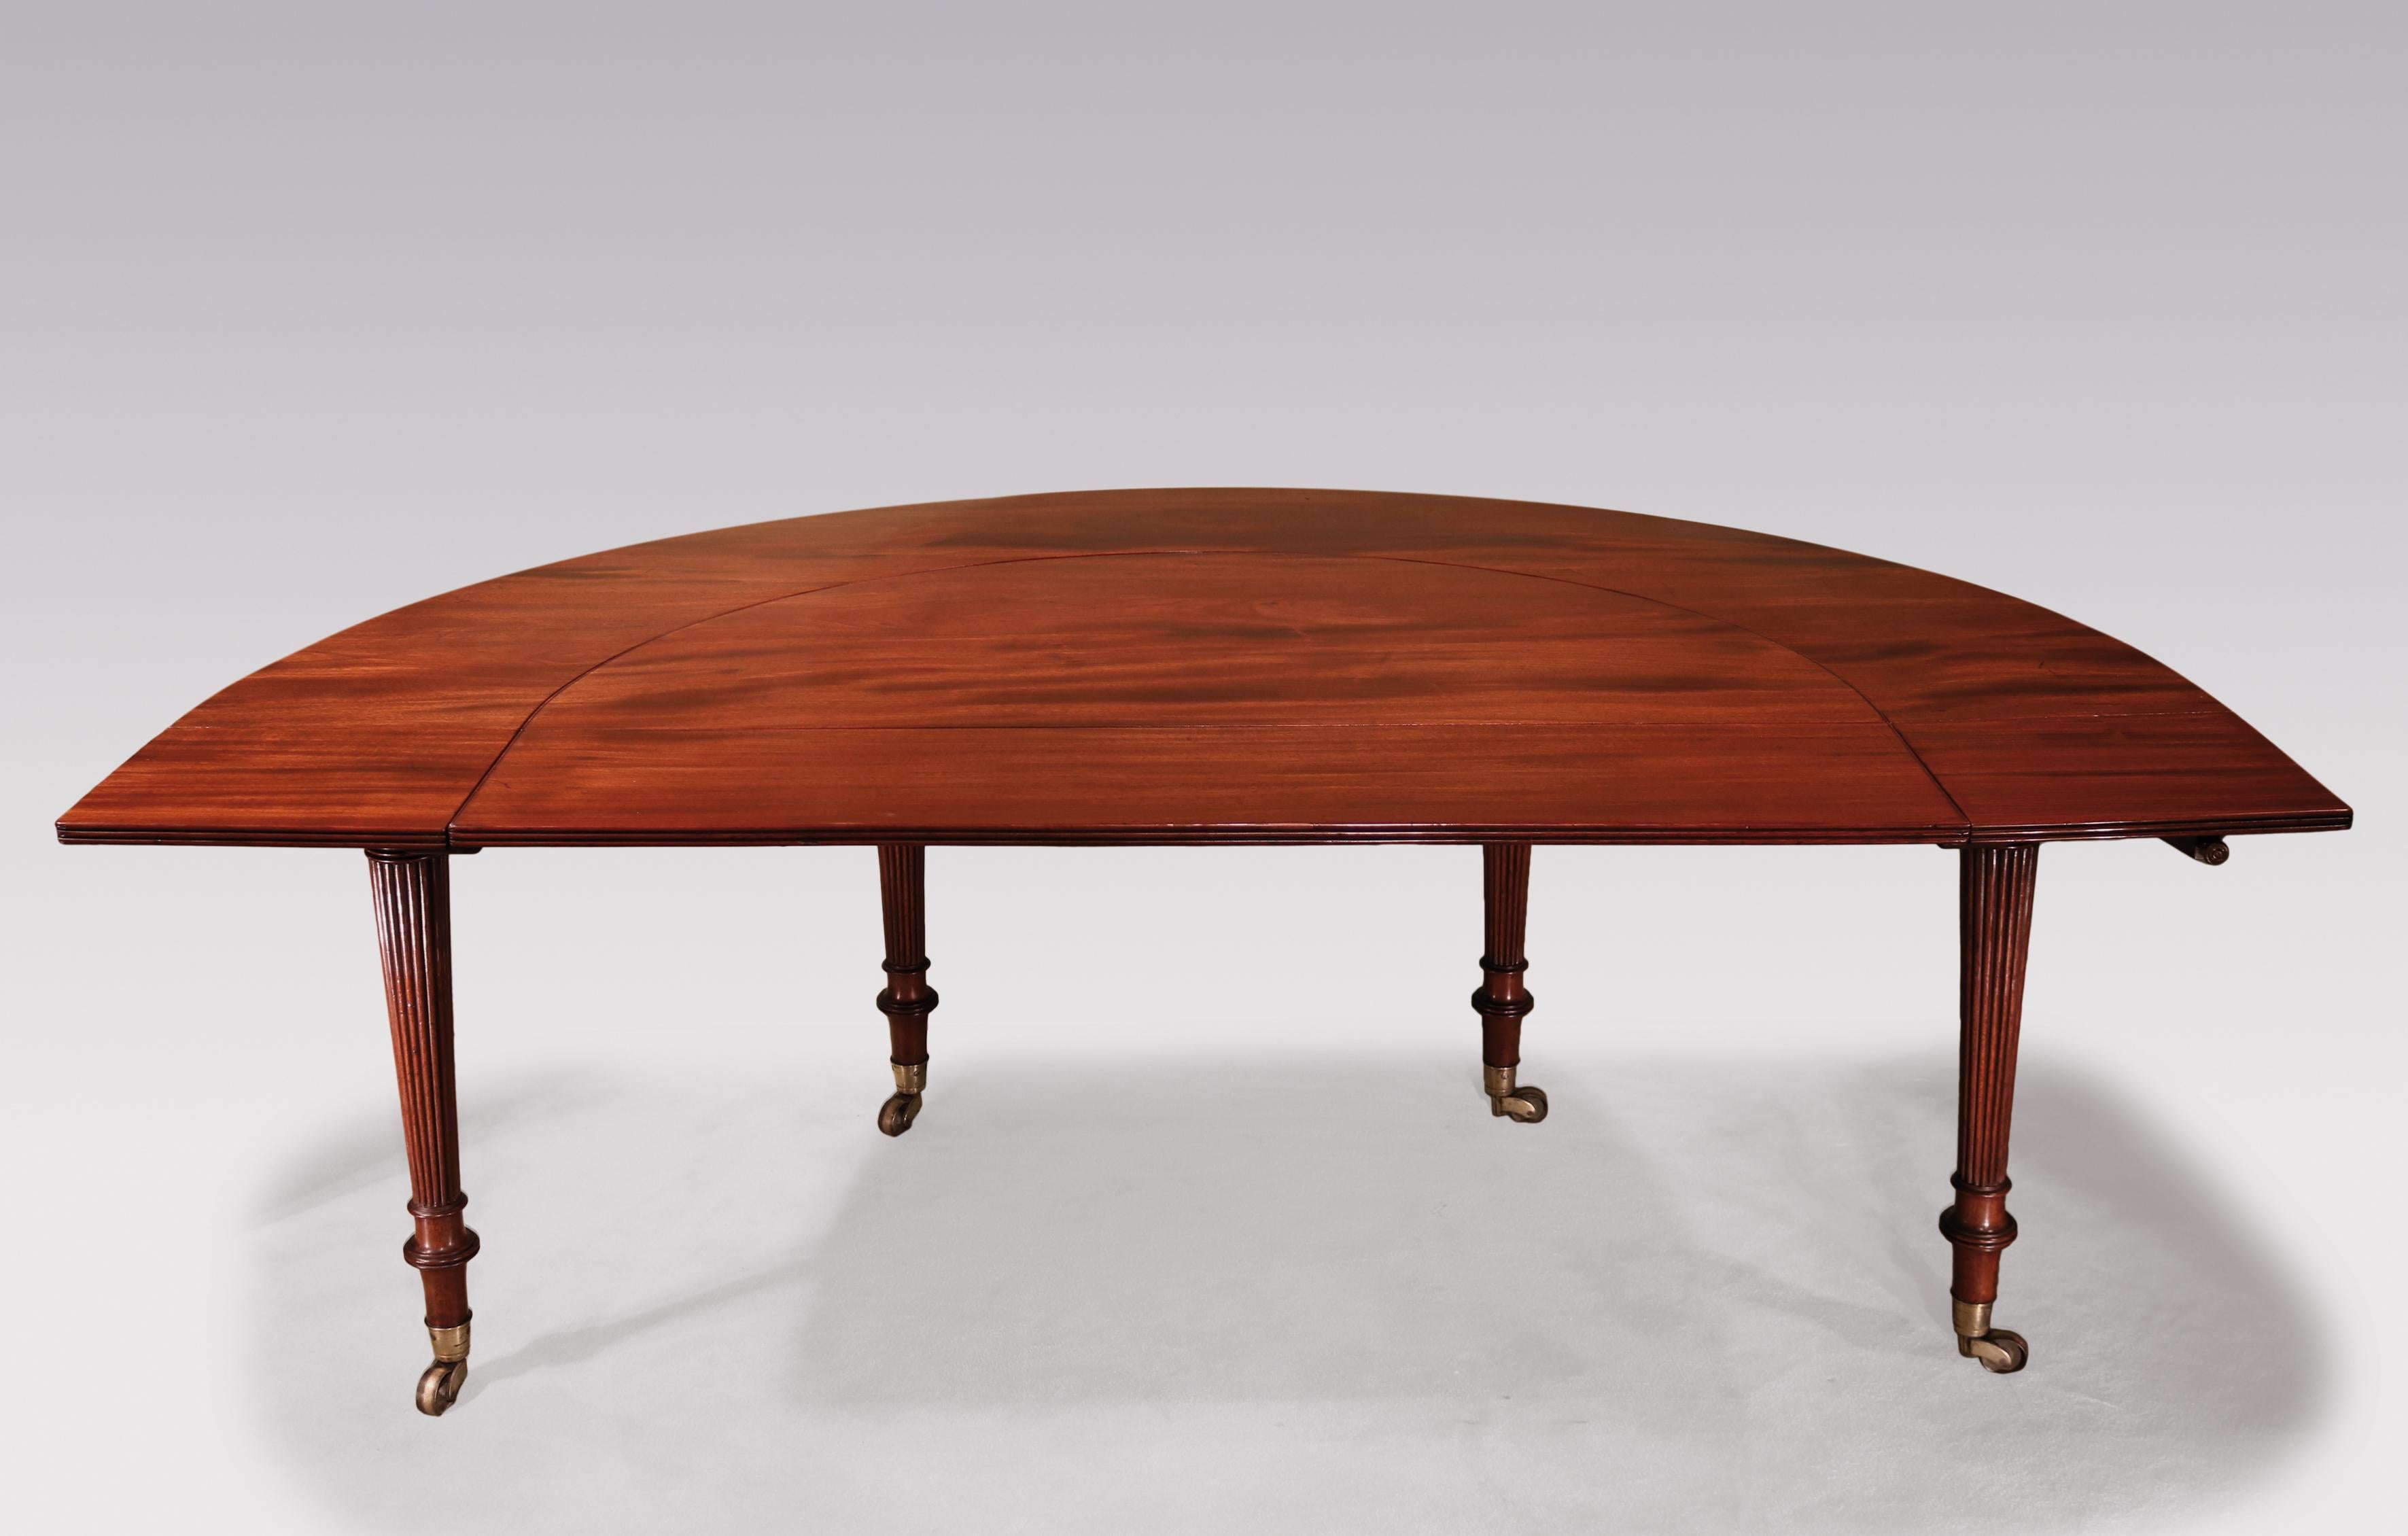 An early 19th century Regency period figured mahogany “Gillows” “Social” or “Wine” table of reeded edged horseshoe shape retaining original centre leaf, fitted with revolving brass arm holding red papier mâché coasters. The Table supported on finely